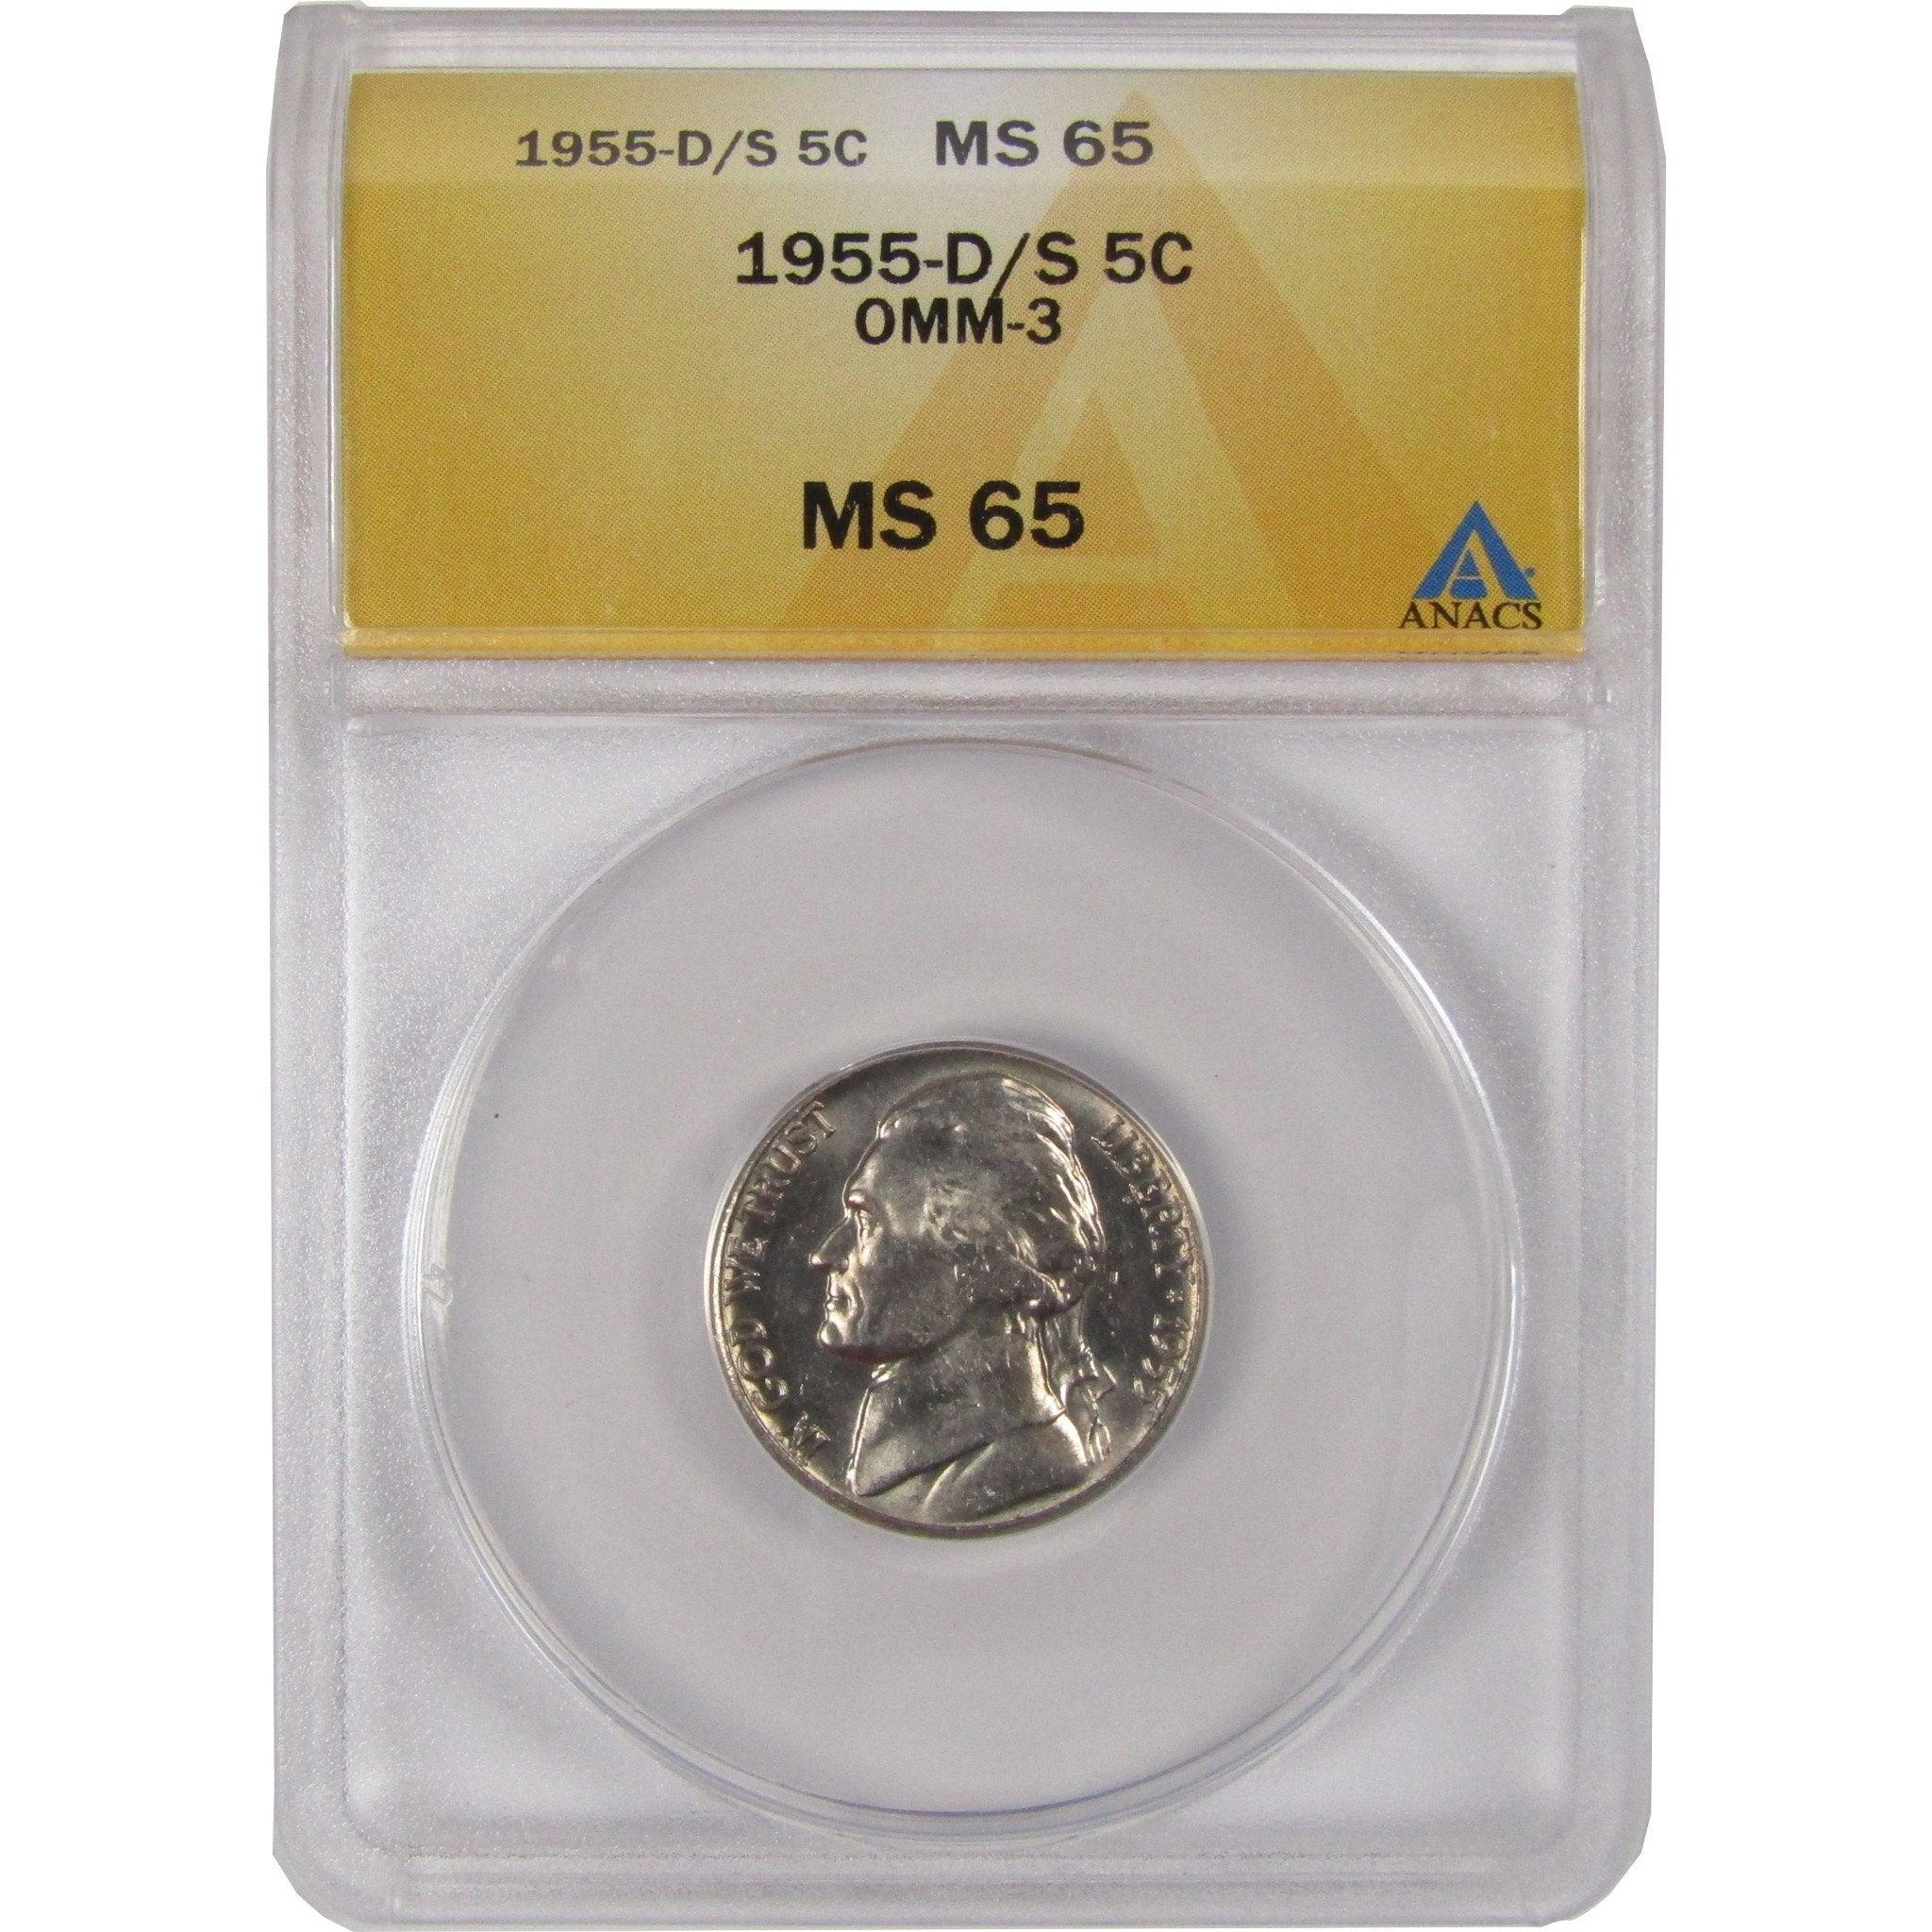 1955 D/S OMM-3 Jefferson Nickel MS 65 ANACS Uncirculated SKU:CPC1129